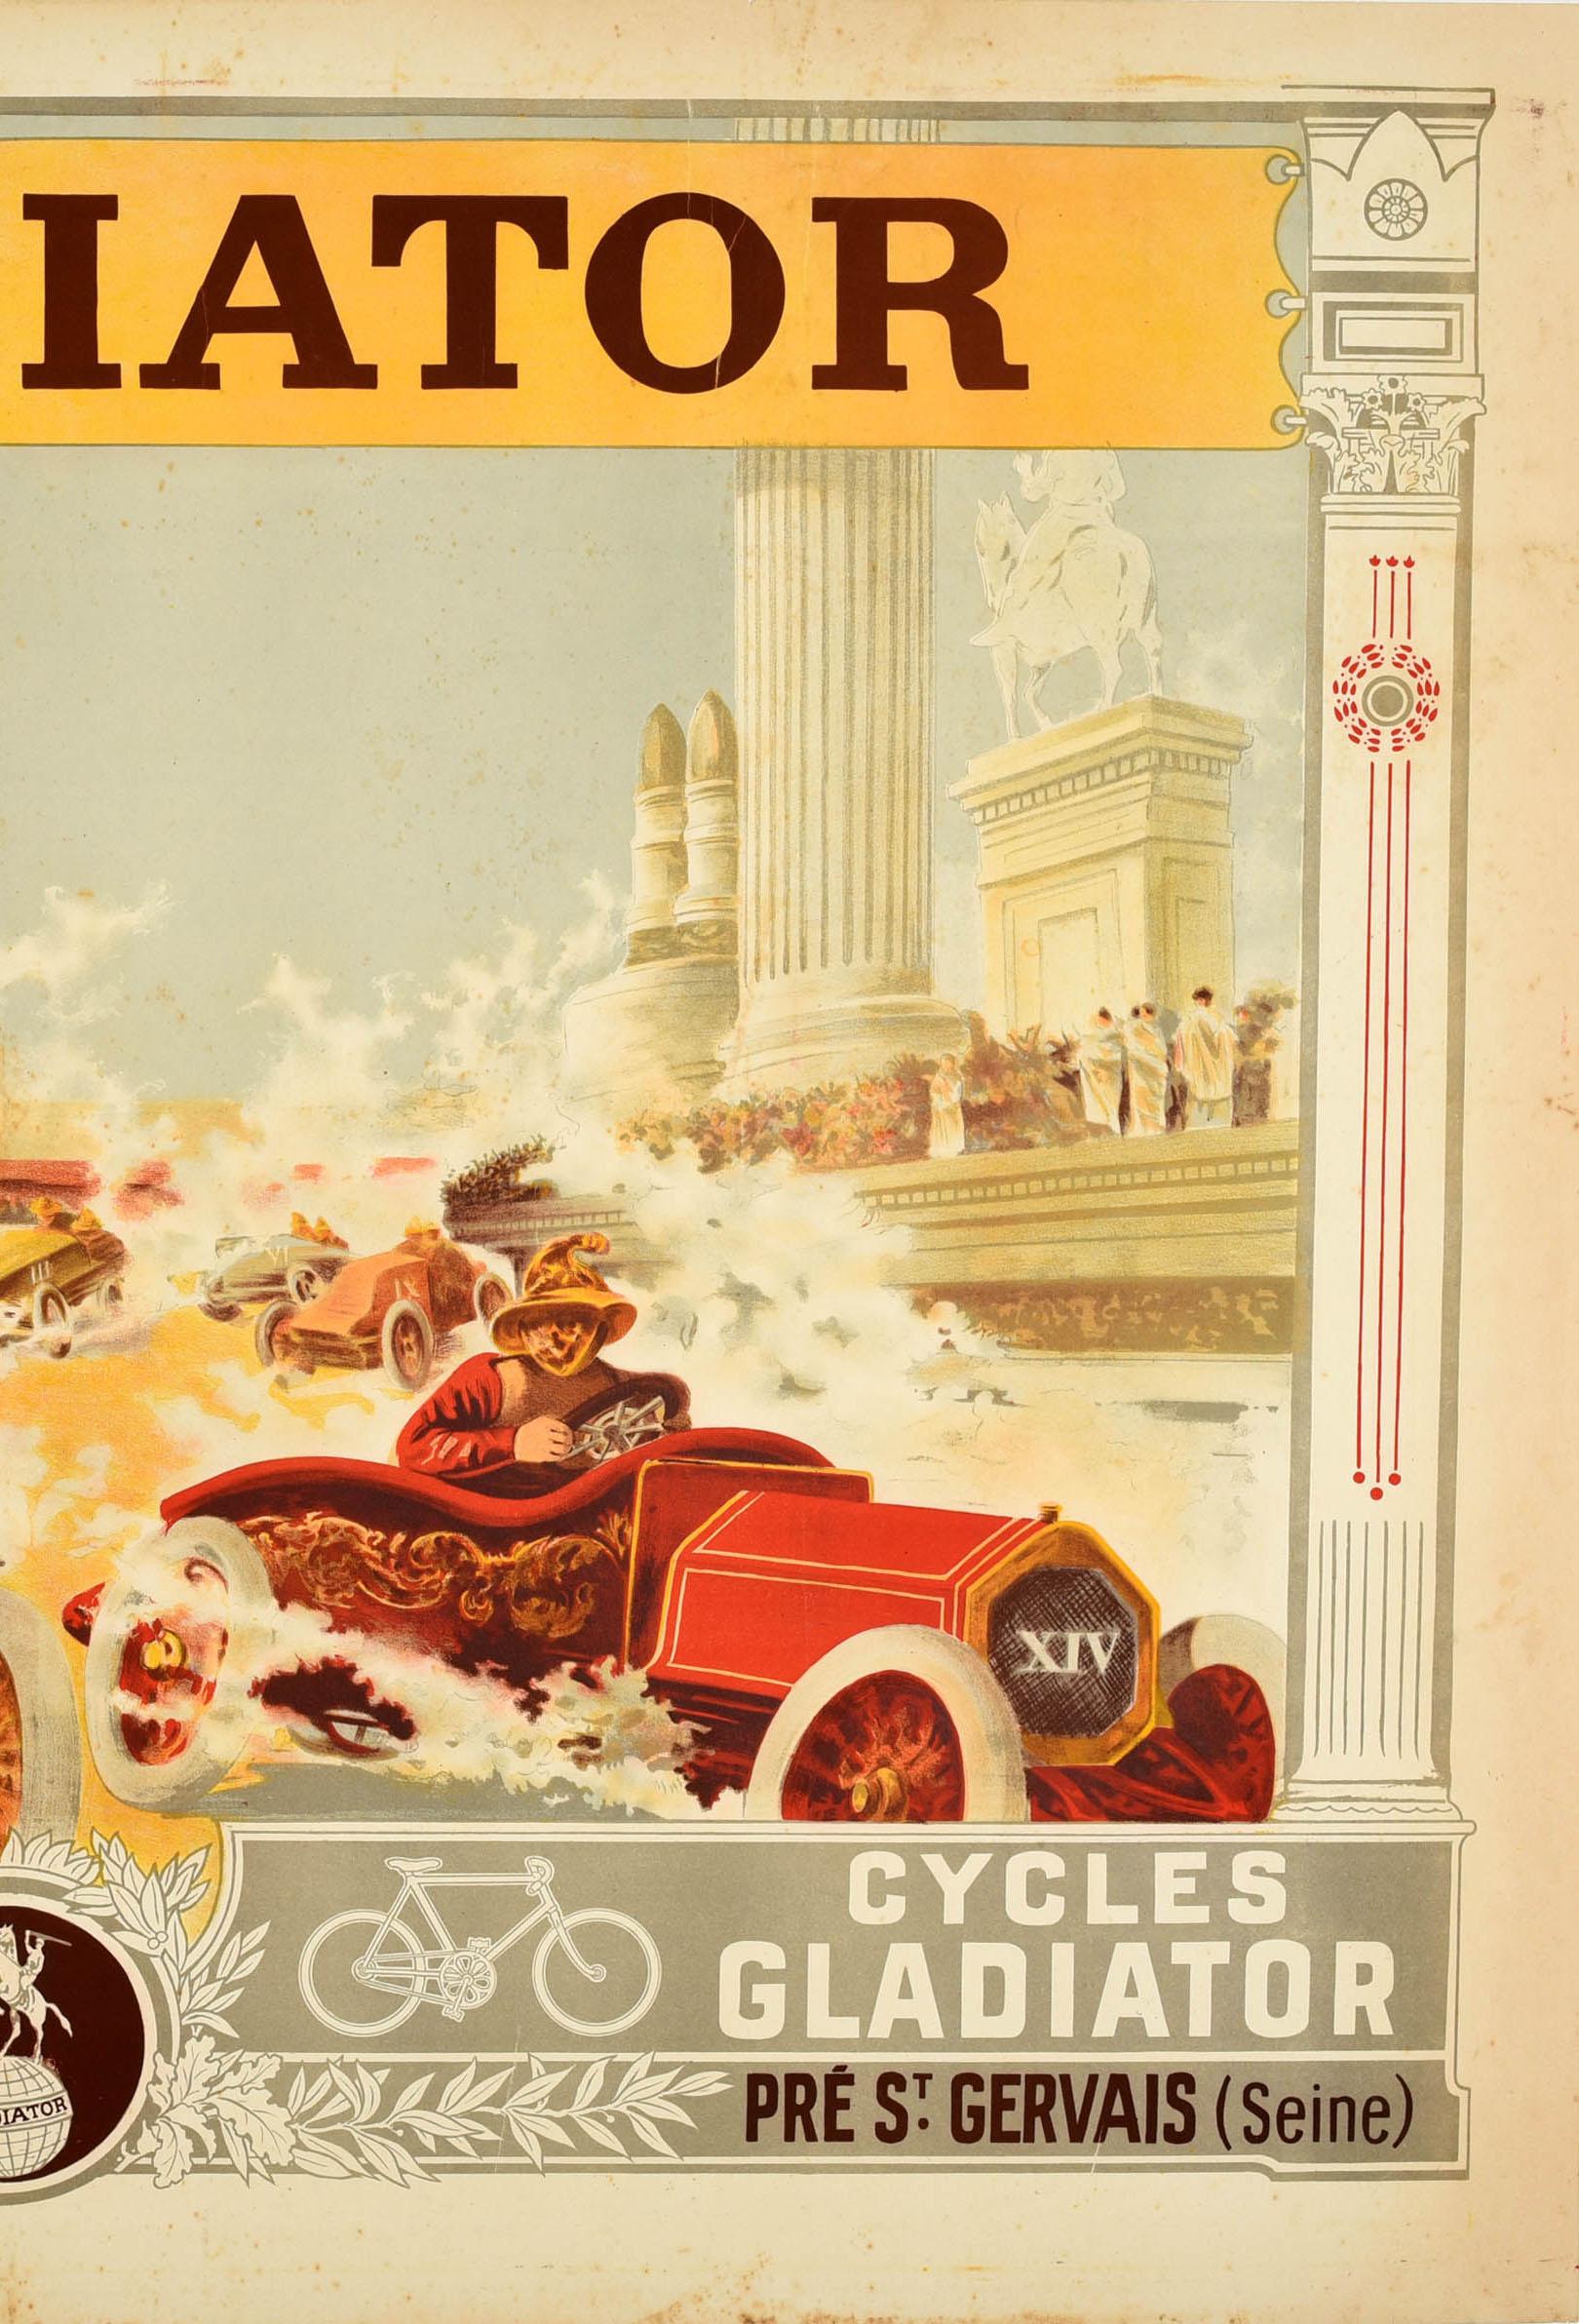 Original antique advertising poster for Gladiator Automobiles and Cycles featuring great artwork by Henri Gray (aka Henri Boulanger; 1858-1924) depicting classic cars speeding and motorbikes racing towards the viewer on an ancient Roman style track